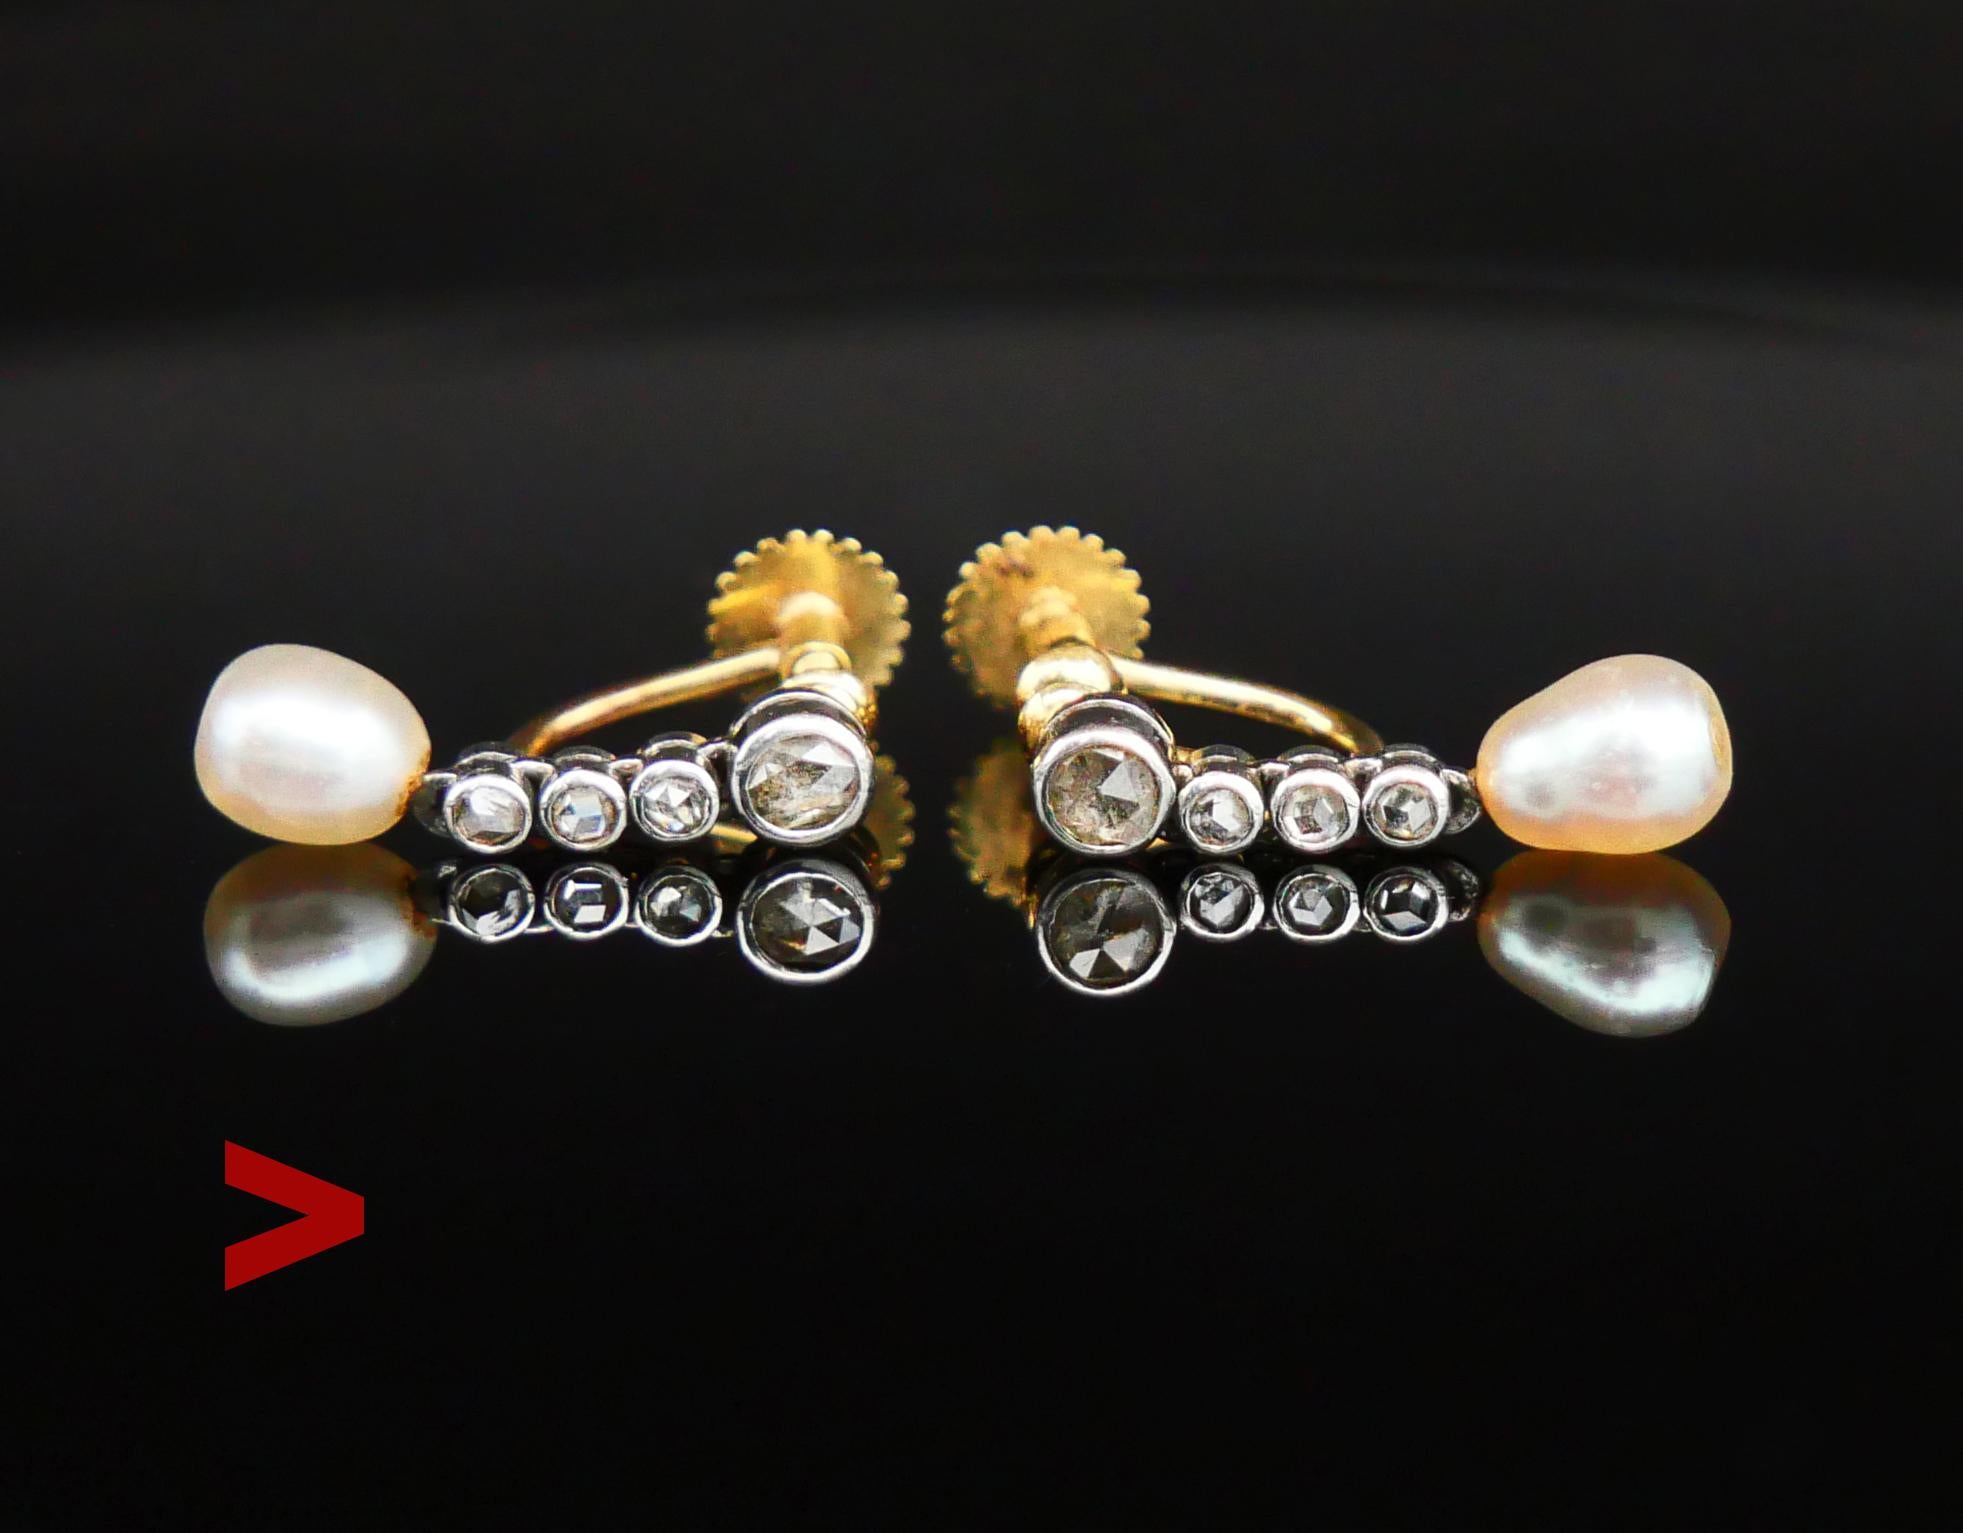 A pair of Swedish Earrings with parts in solid Yellow 18K Gold and 18K White Gold / or Platinum. Flexible constructions, each piece with four bezel set rose cut Diamonds and likely natural River Pearls. Screws with Swedish hallmarks,maker is GD&Co